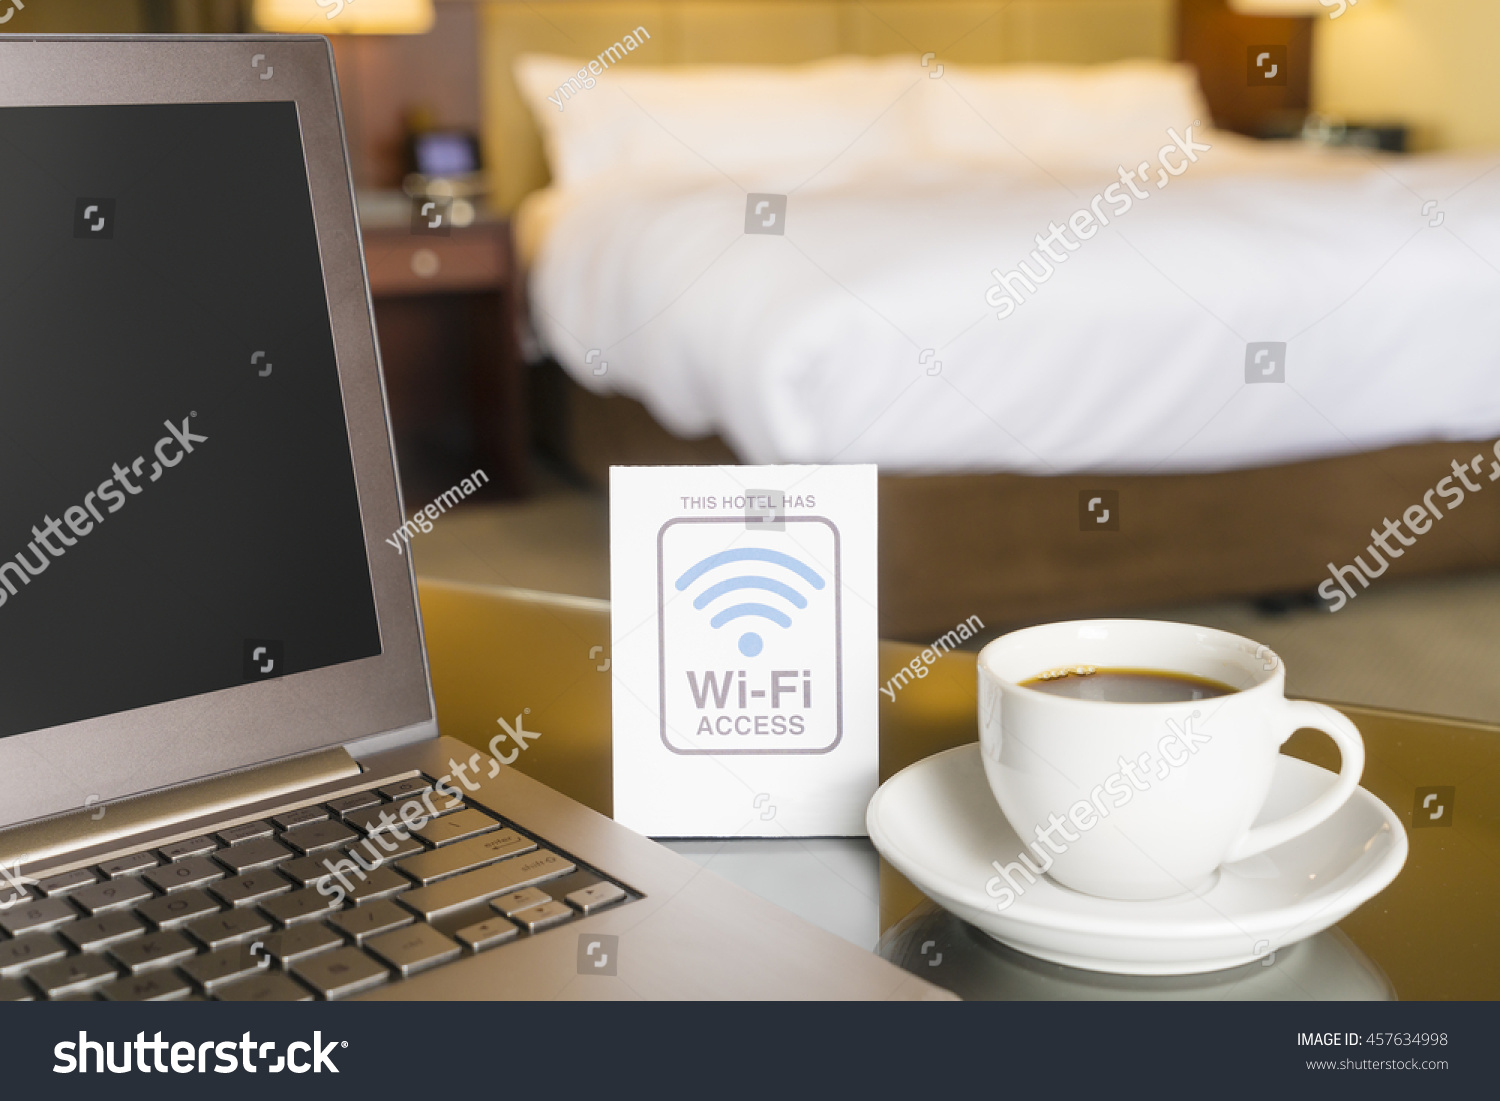 Hotel room with wifi access sign, laptop and cup of coffee #457634998